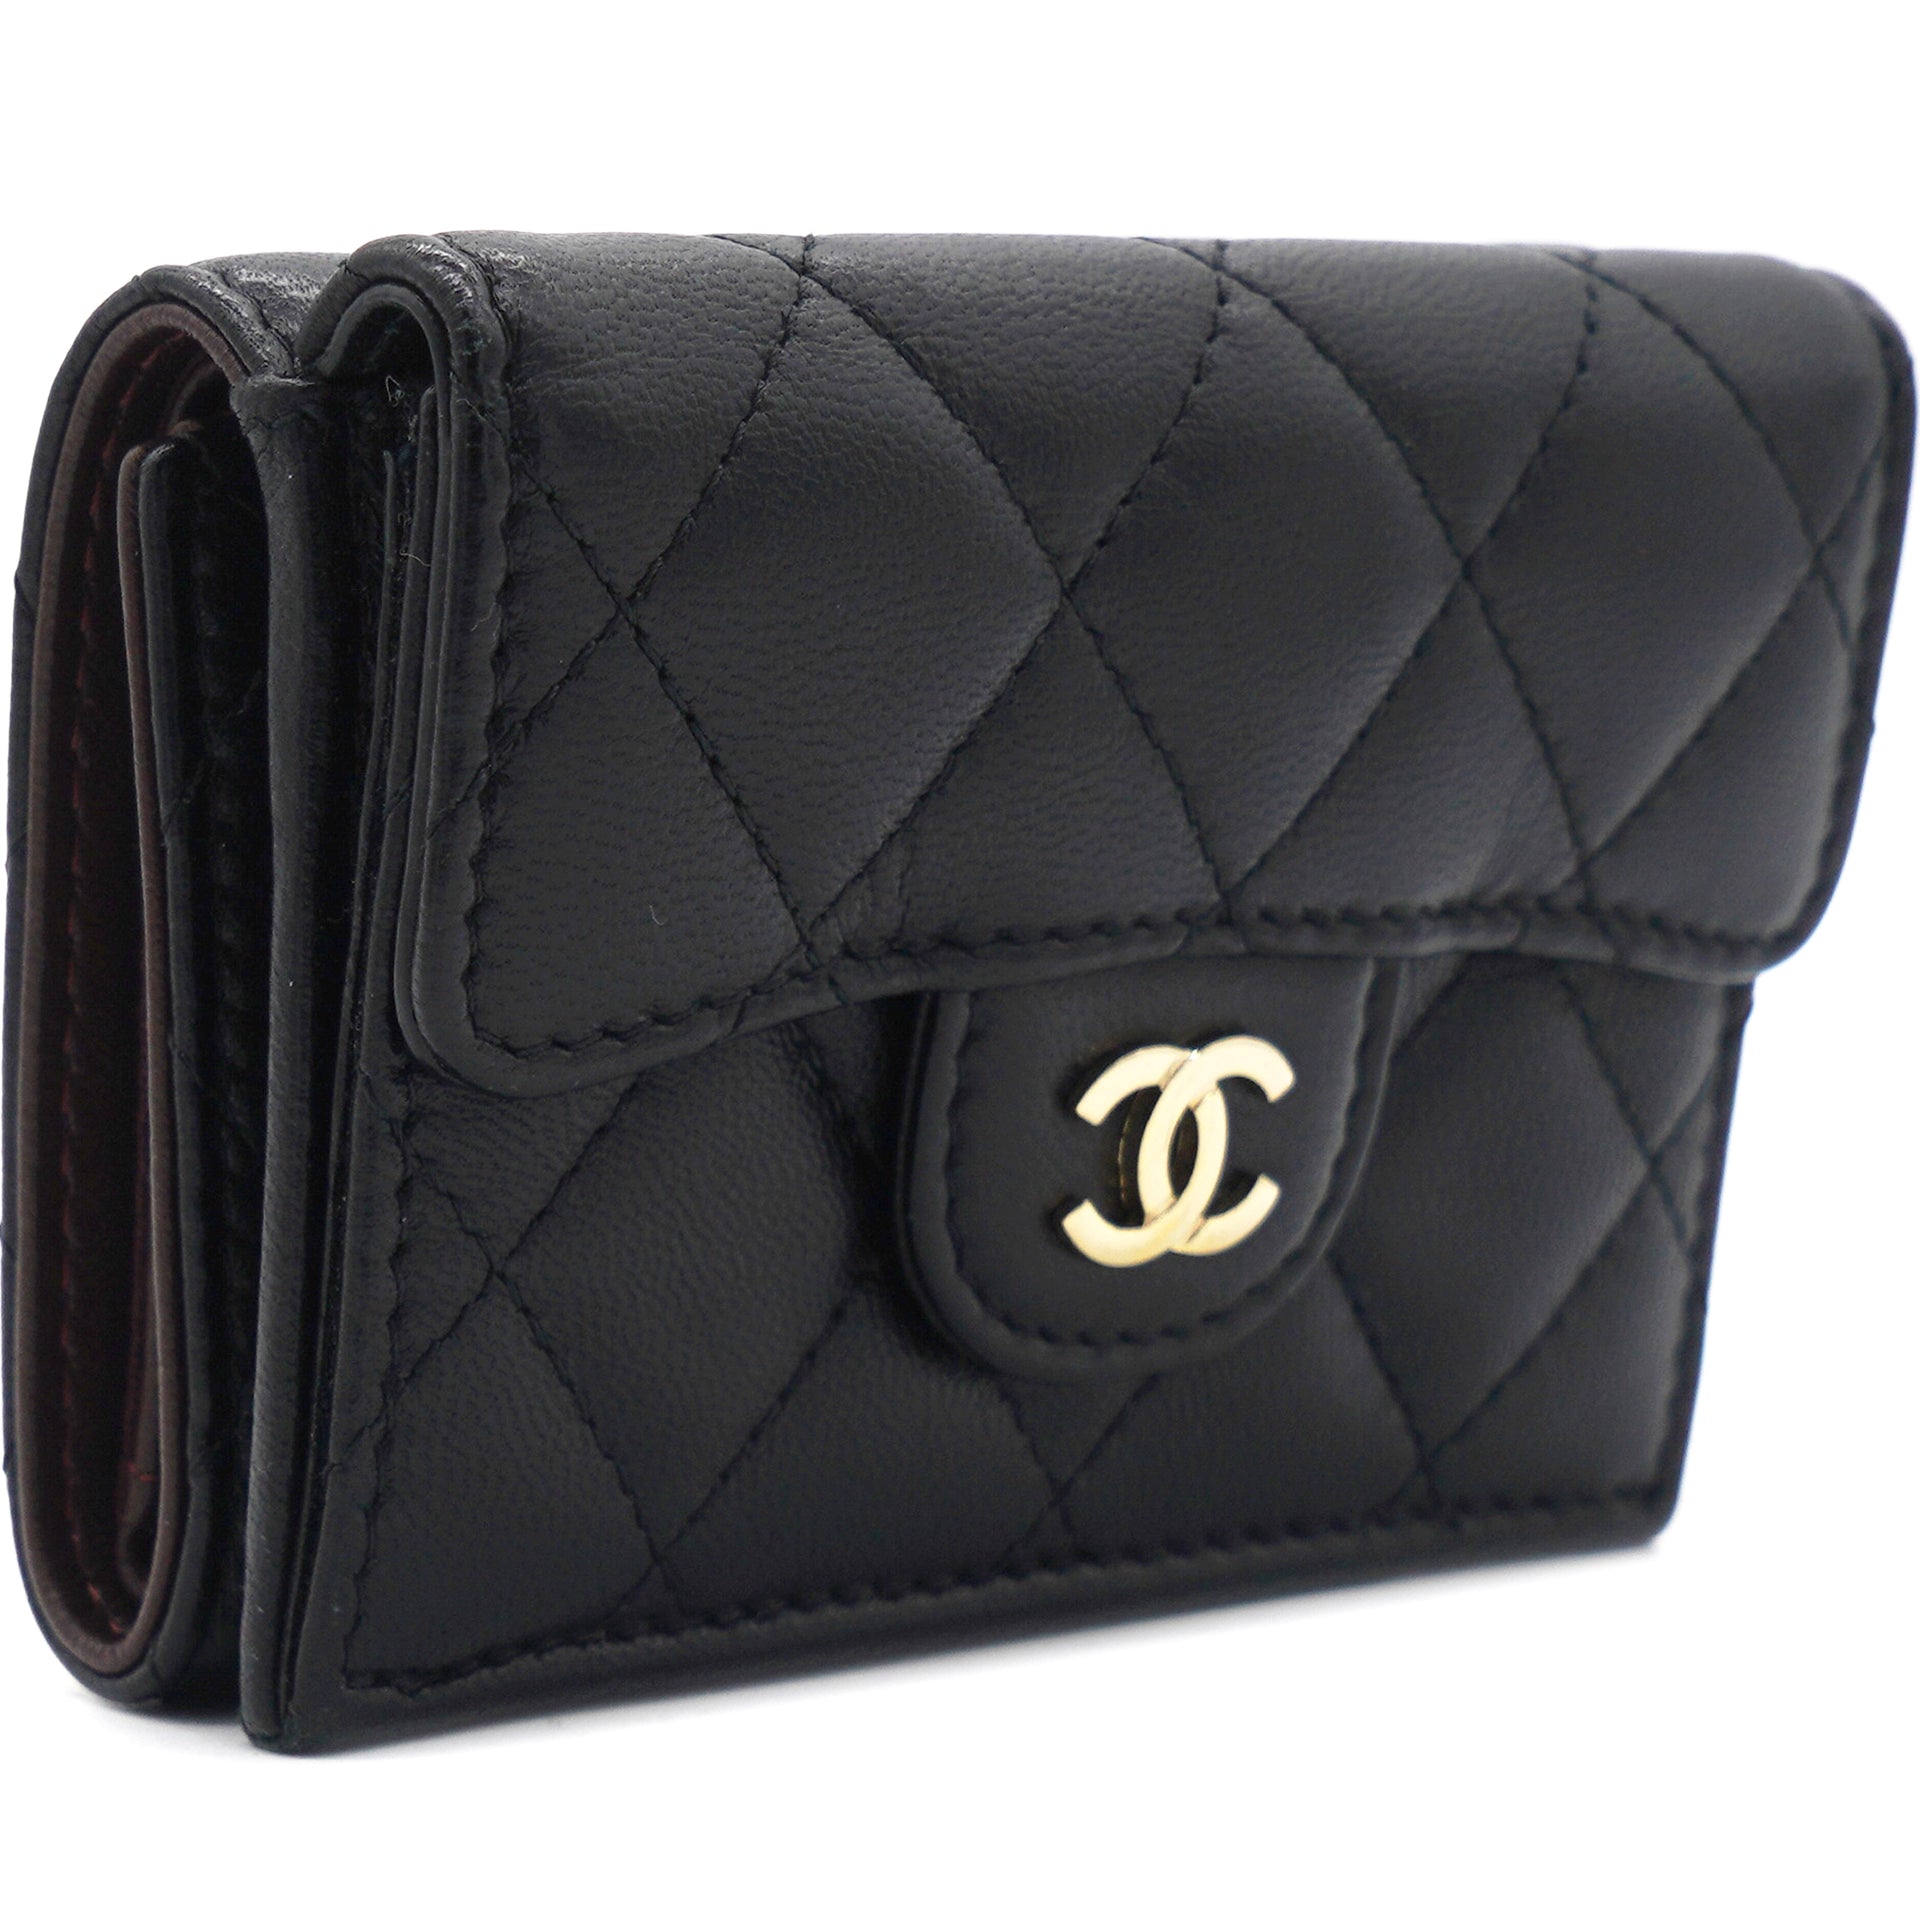 Preloved Chanel Black Leather CC French Wallet 3158844 061923 – KimmieBBags  LLC